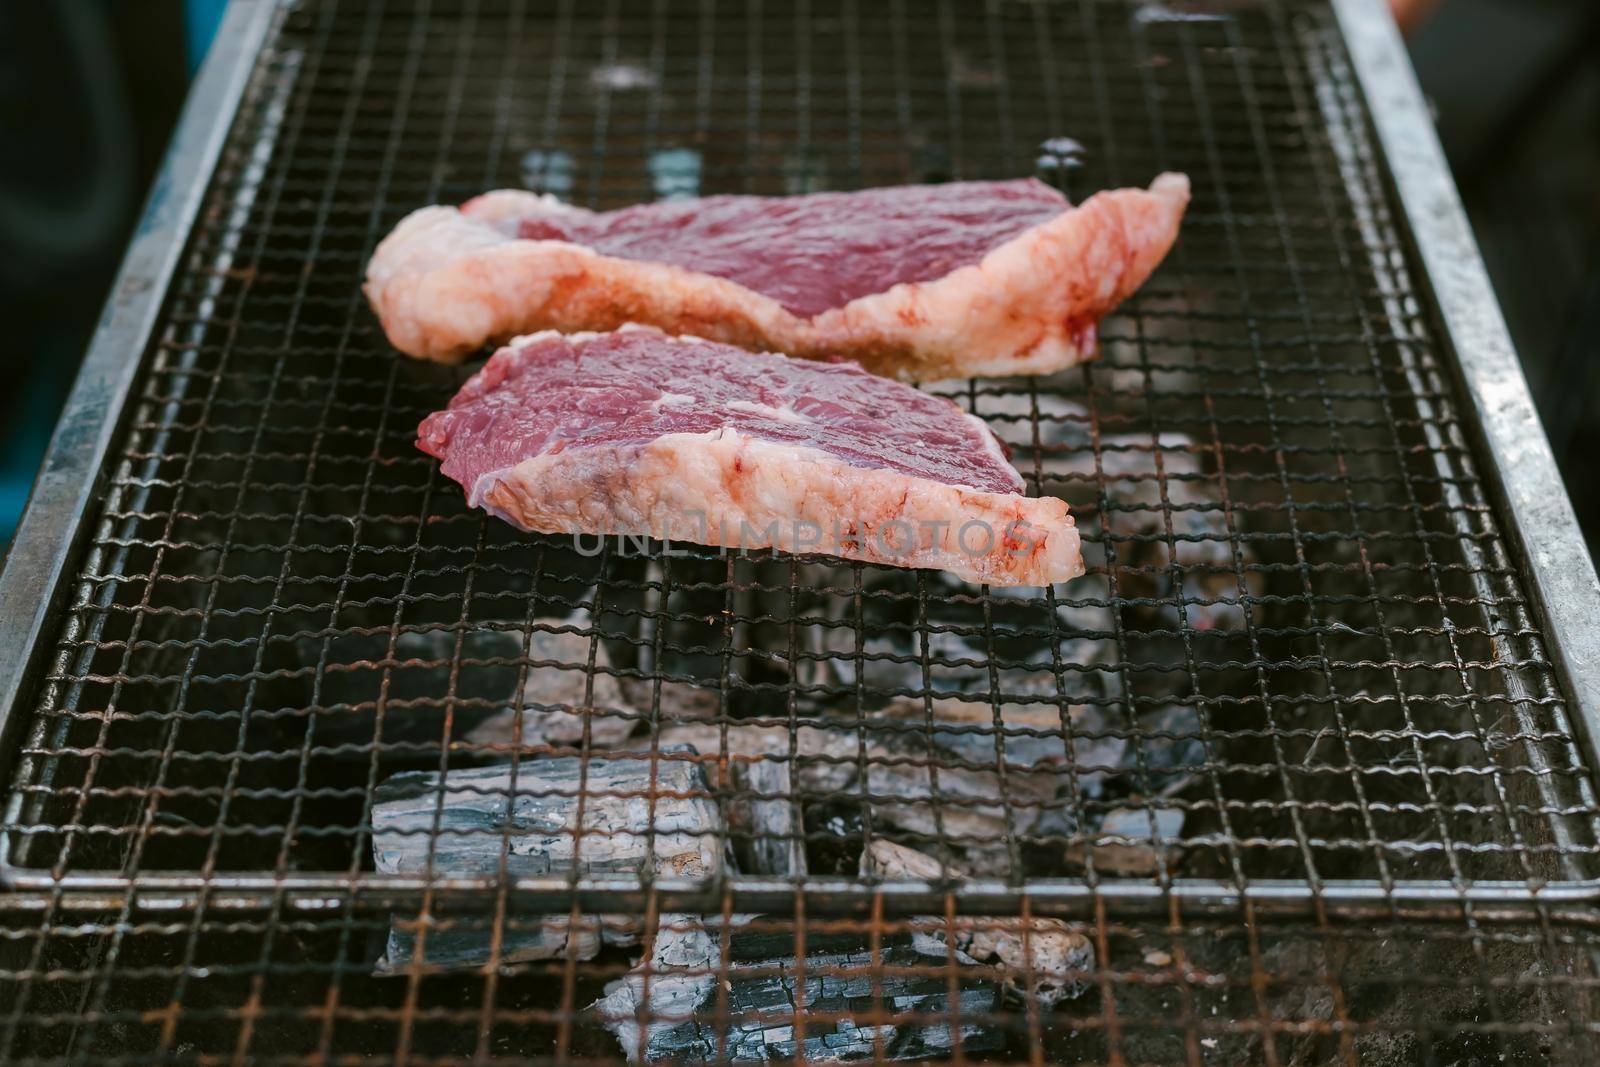 Grill the beef on the charcoal grill to cook steaks. by wattanaphob